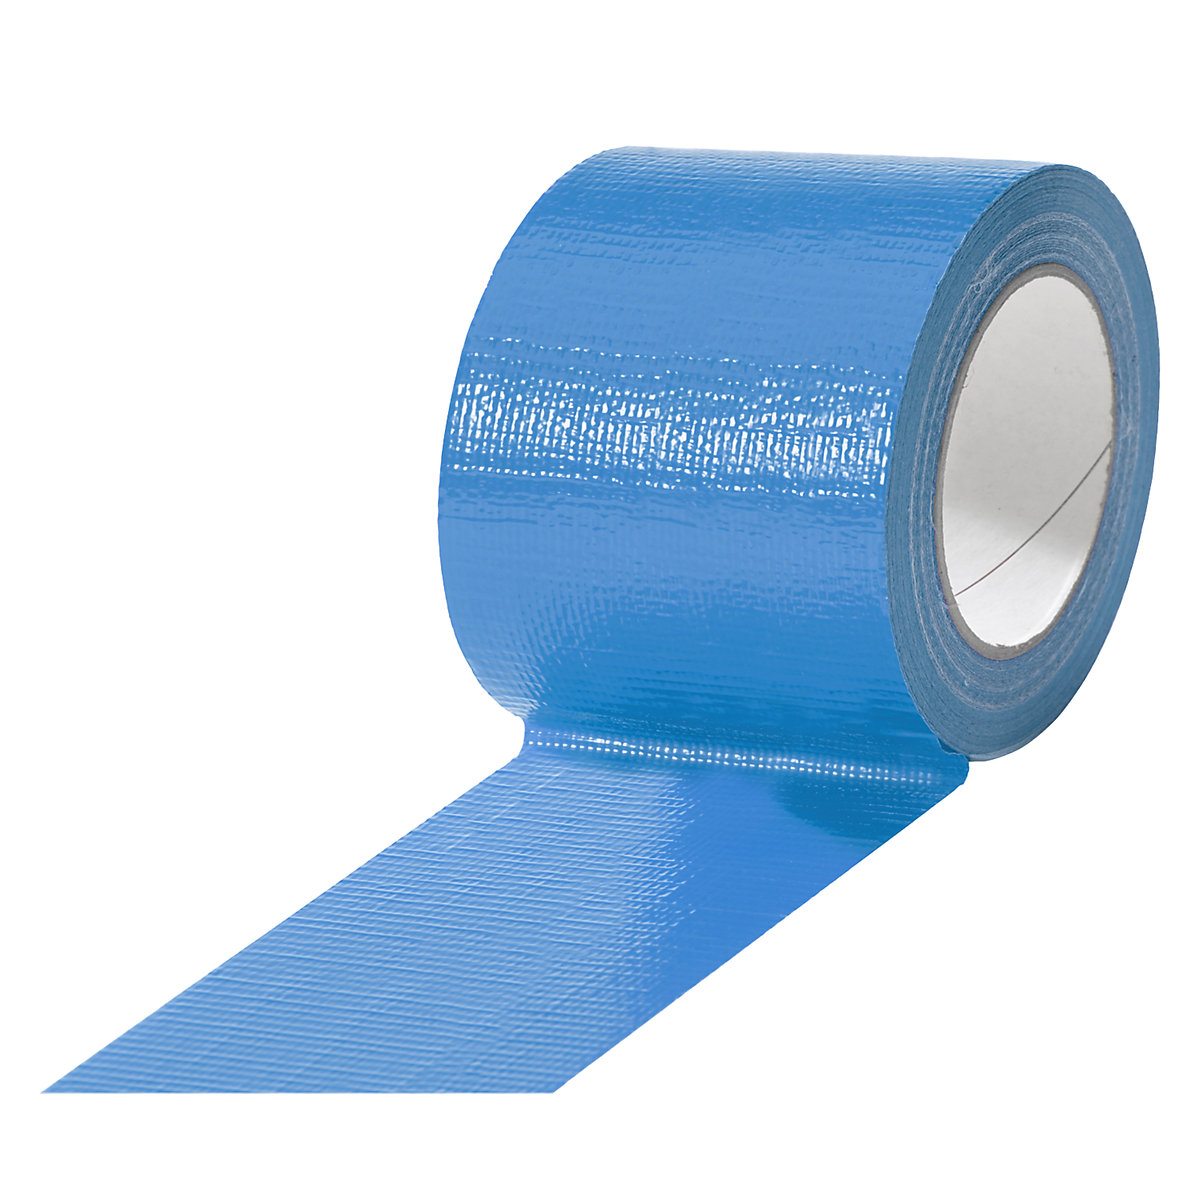 Fabric tape, in different colours, pack of 12 rolls, blue, tape width 75 mm-13